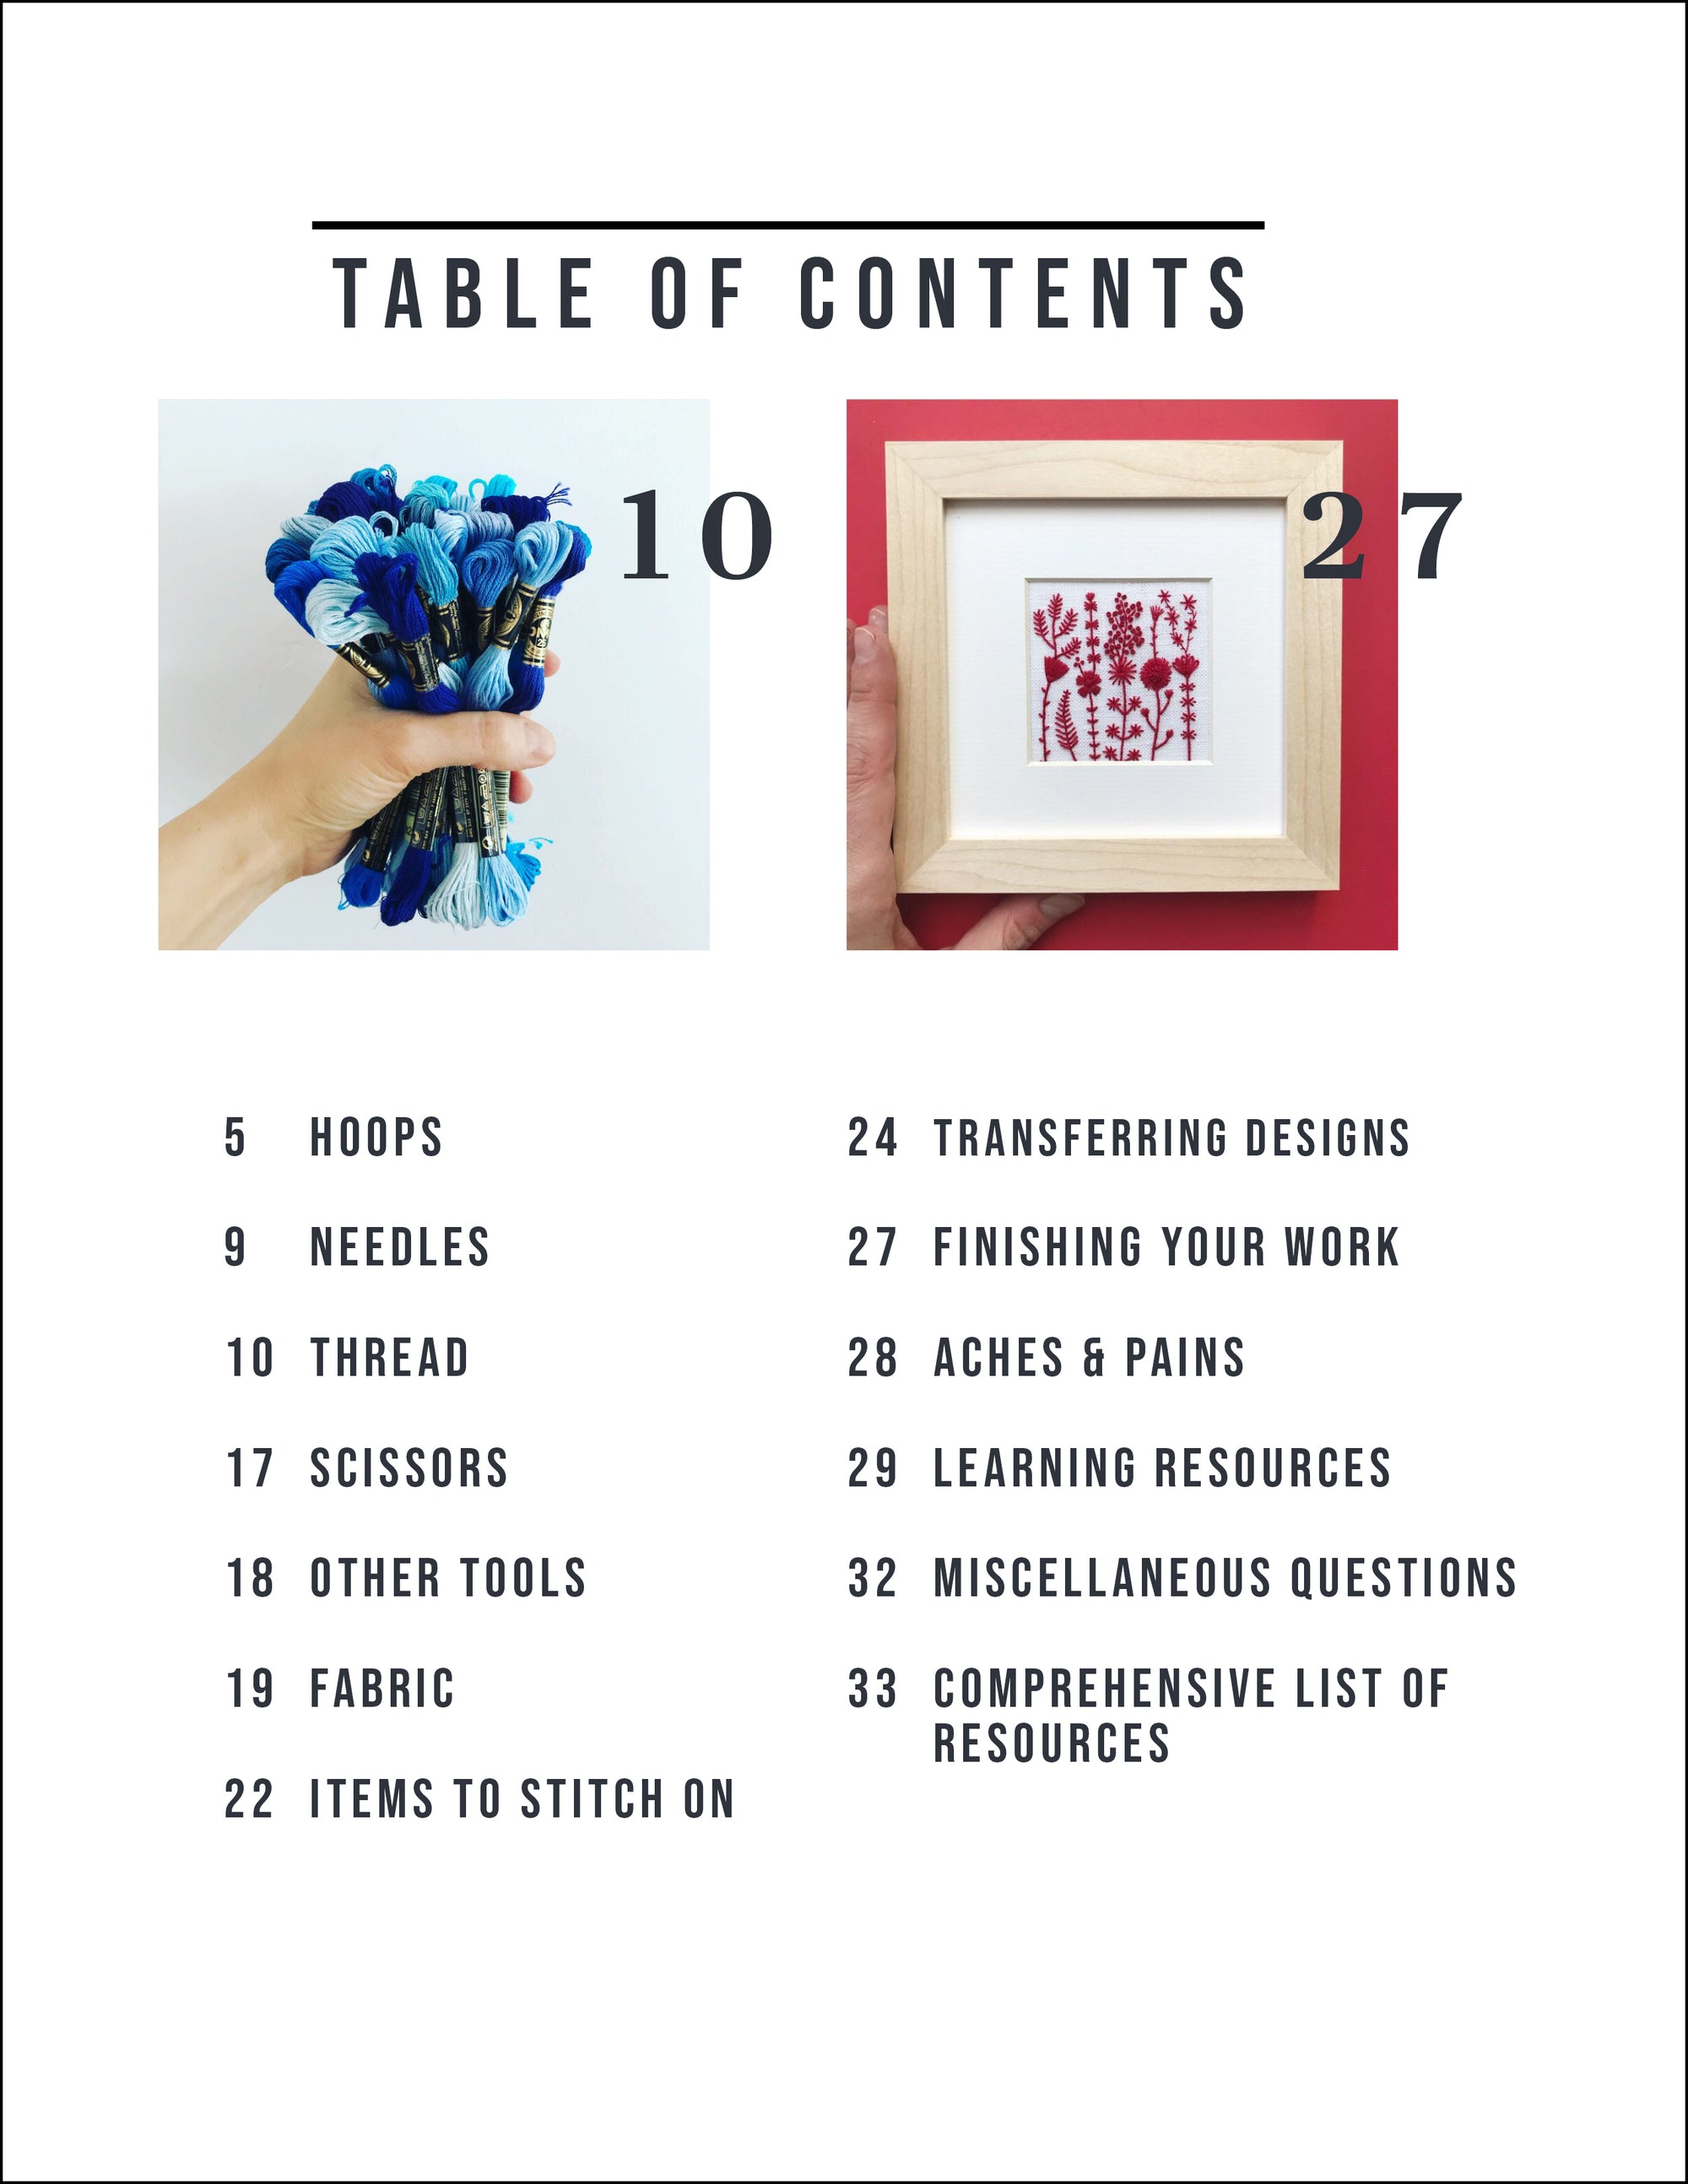 Hand Embroidery Essentials Guide (Second Edition) - Digital Download